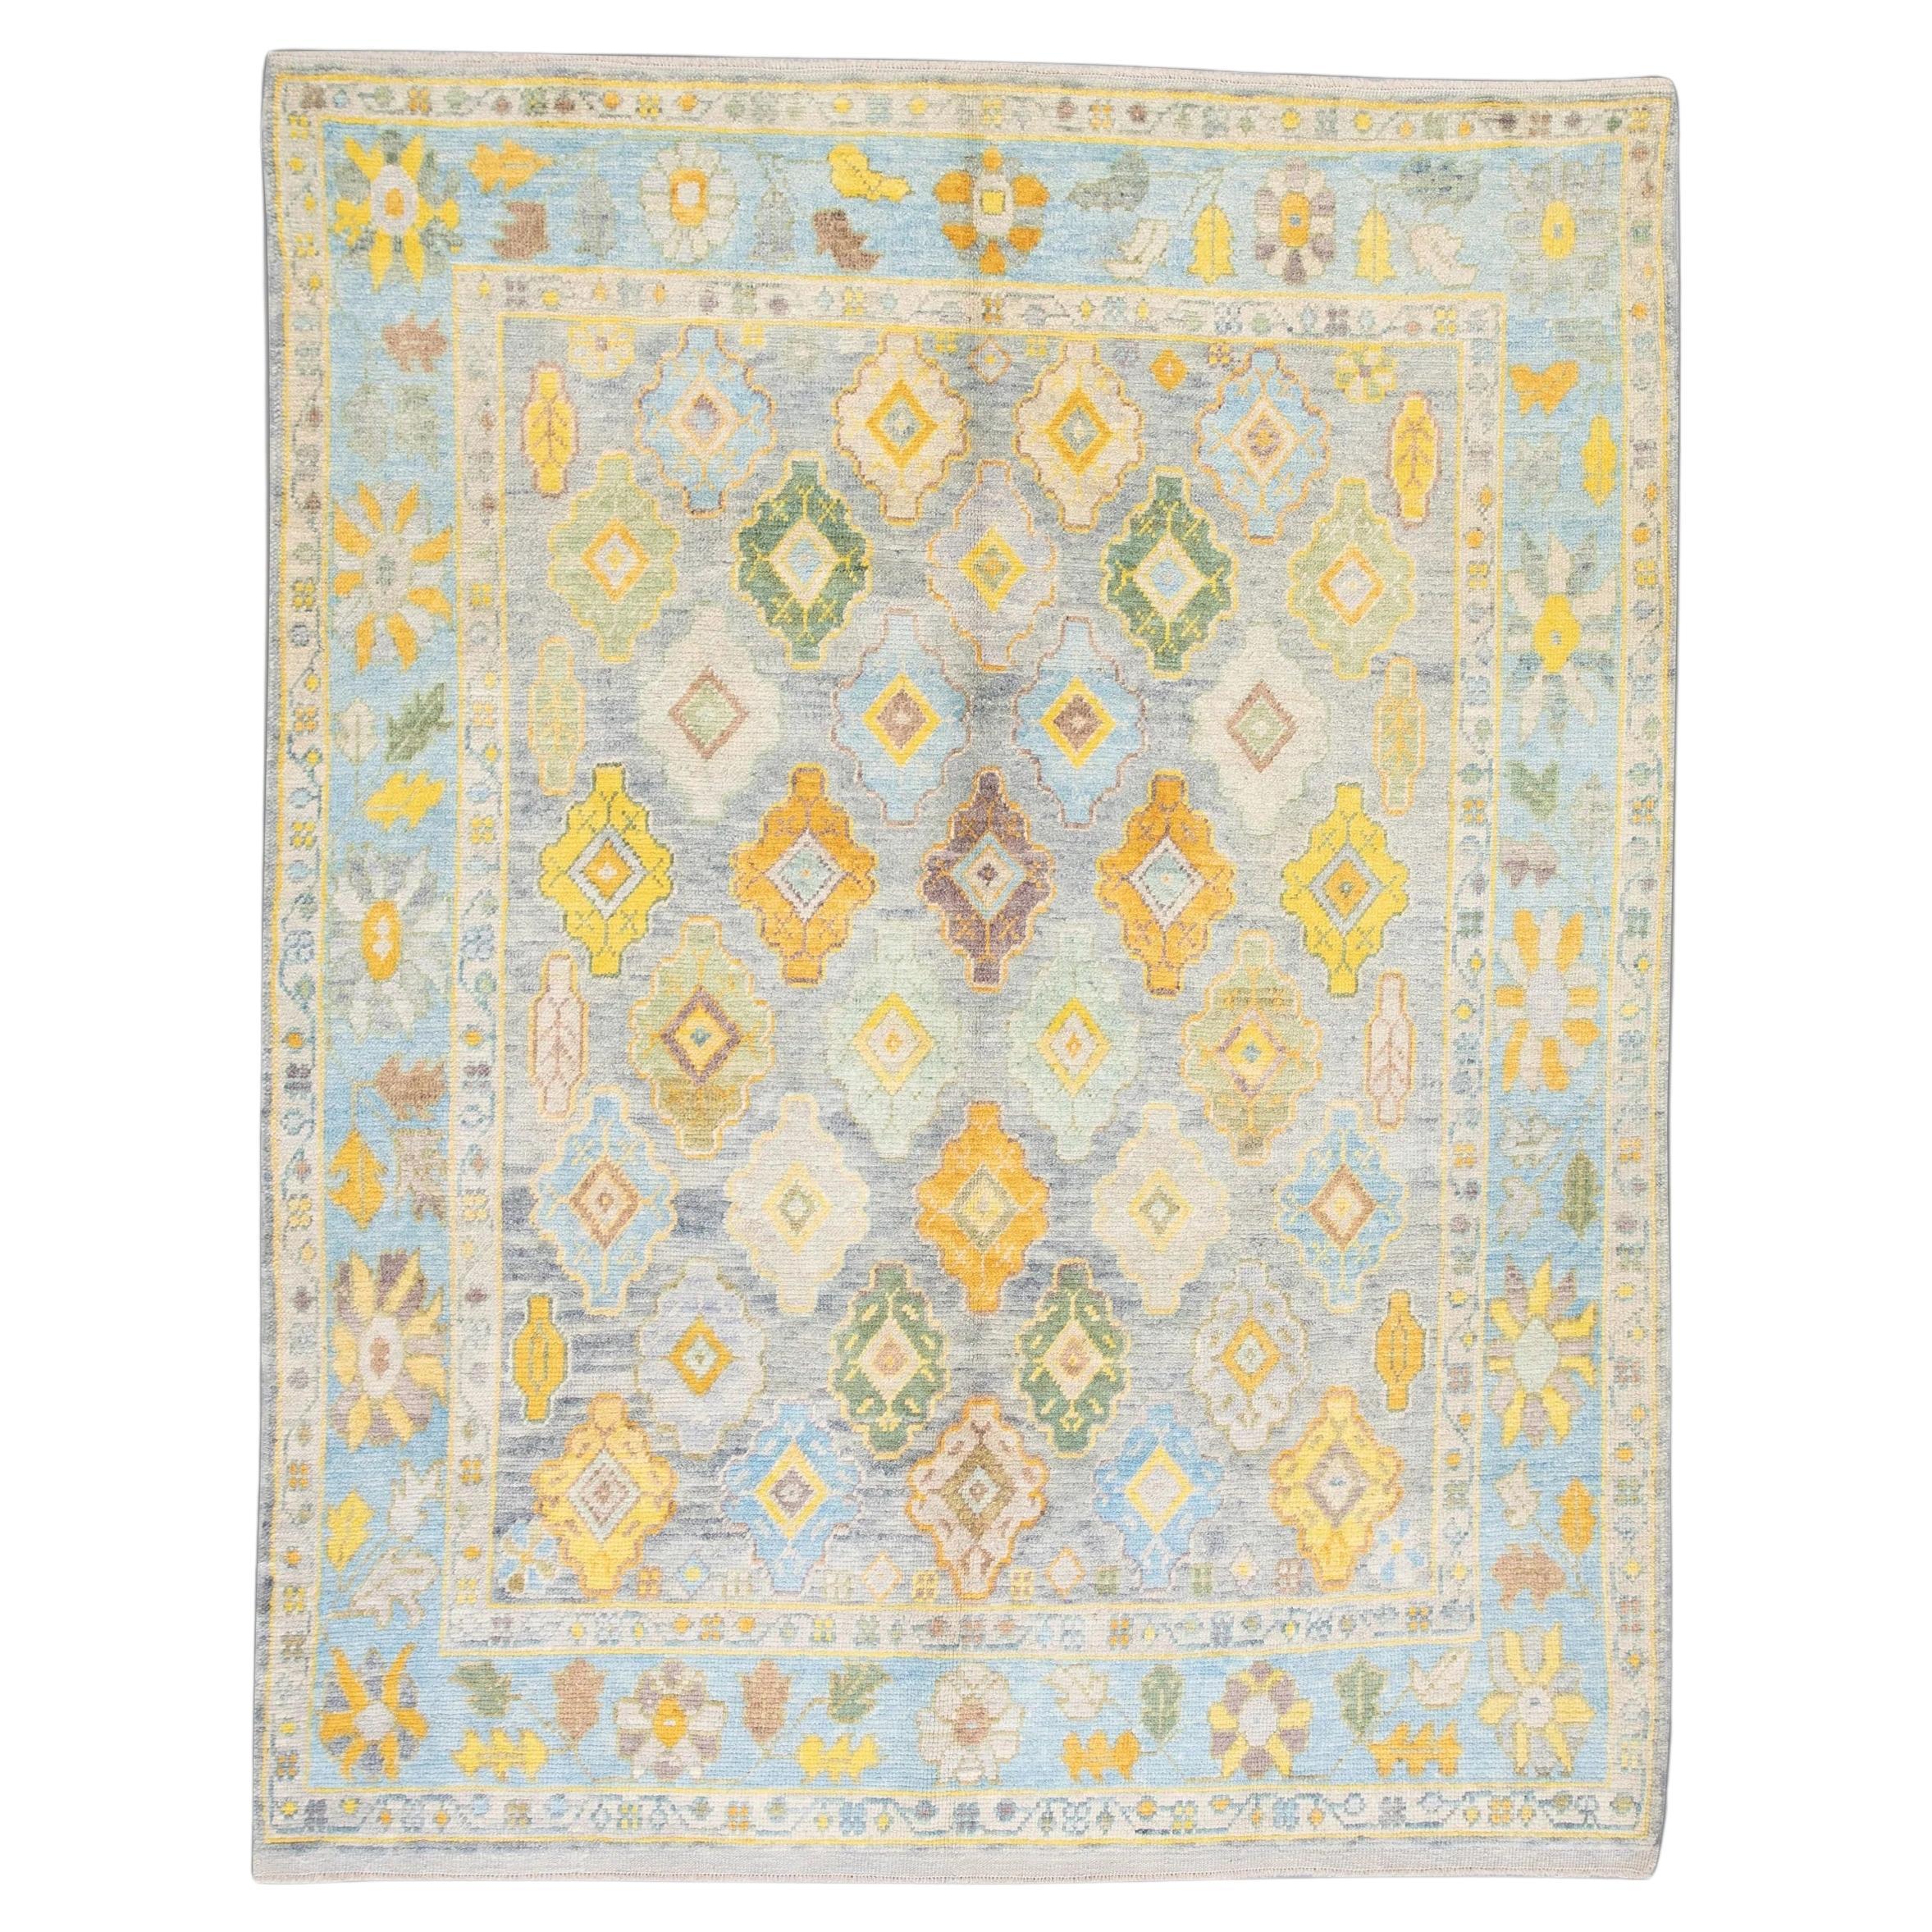 Handwoven Wool Floral Turkish Oushak Rug in Blue, Green, and Yellow 8'1" x 9'10"